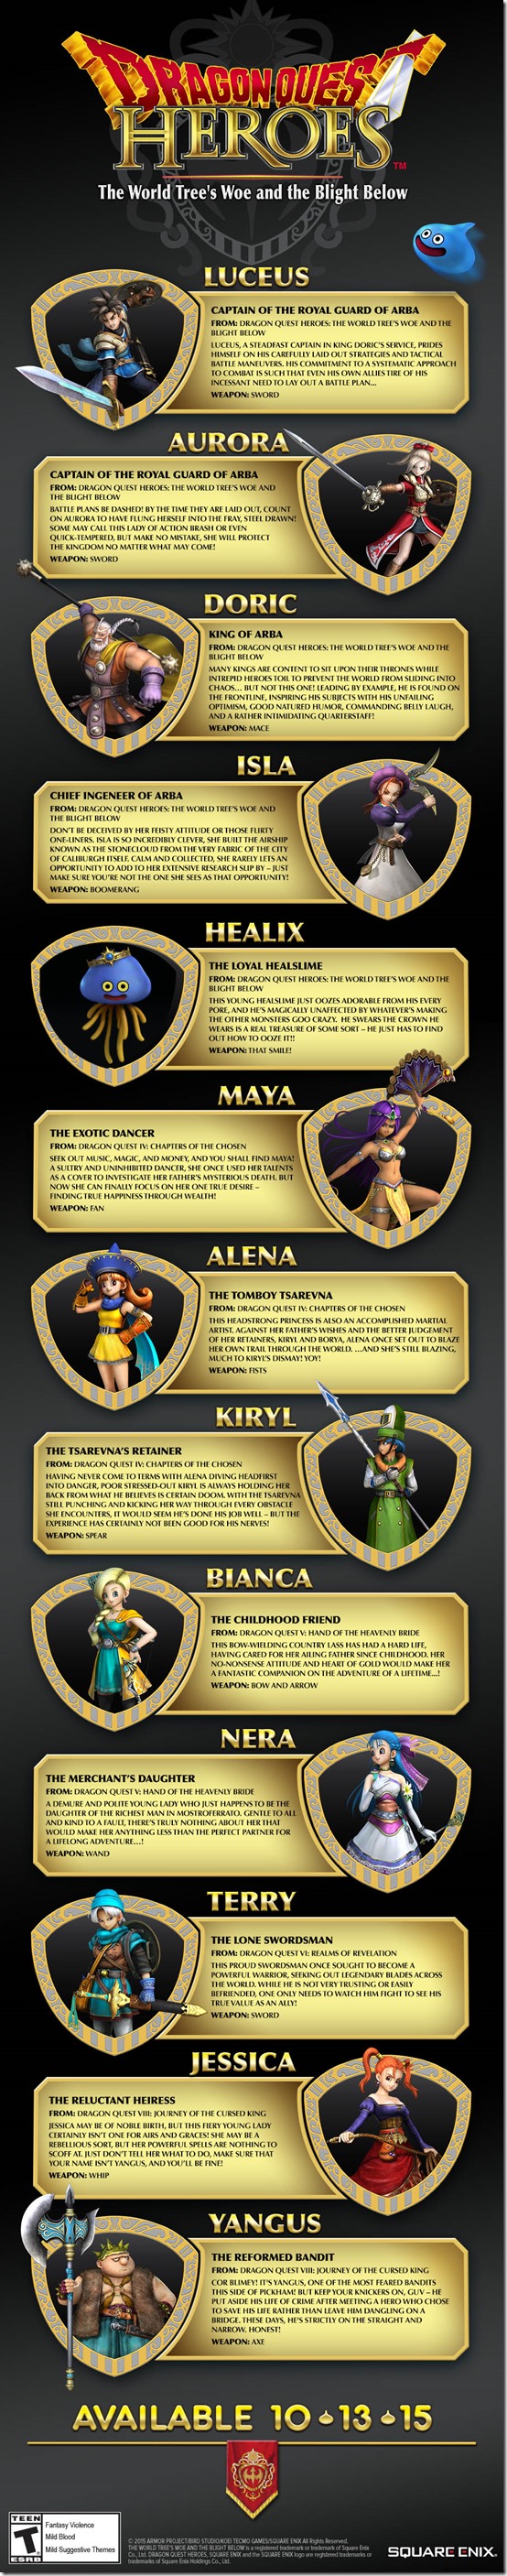 DQH_infogrfx_characters